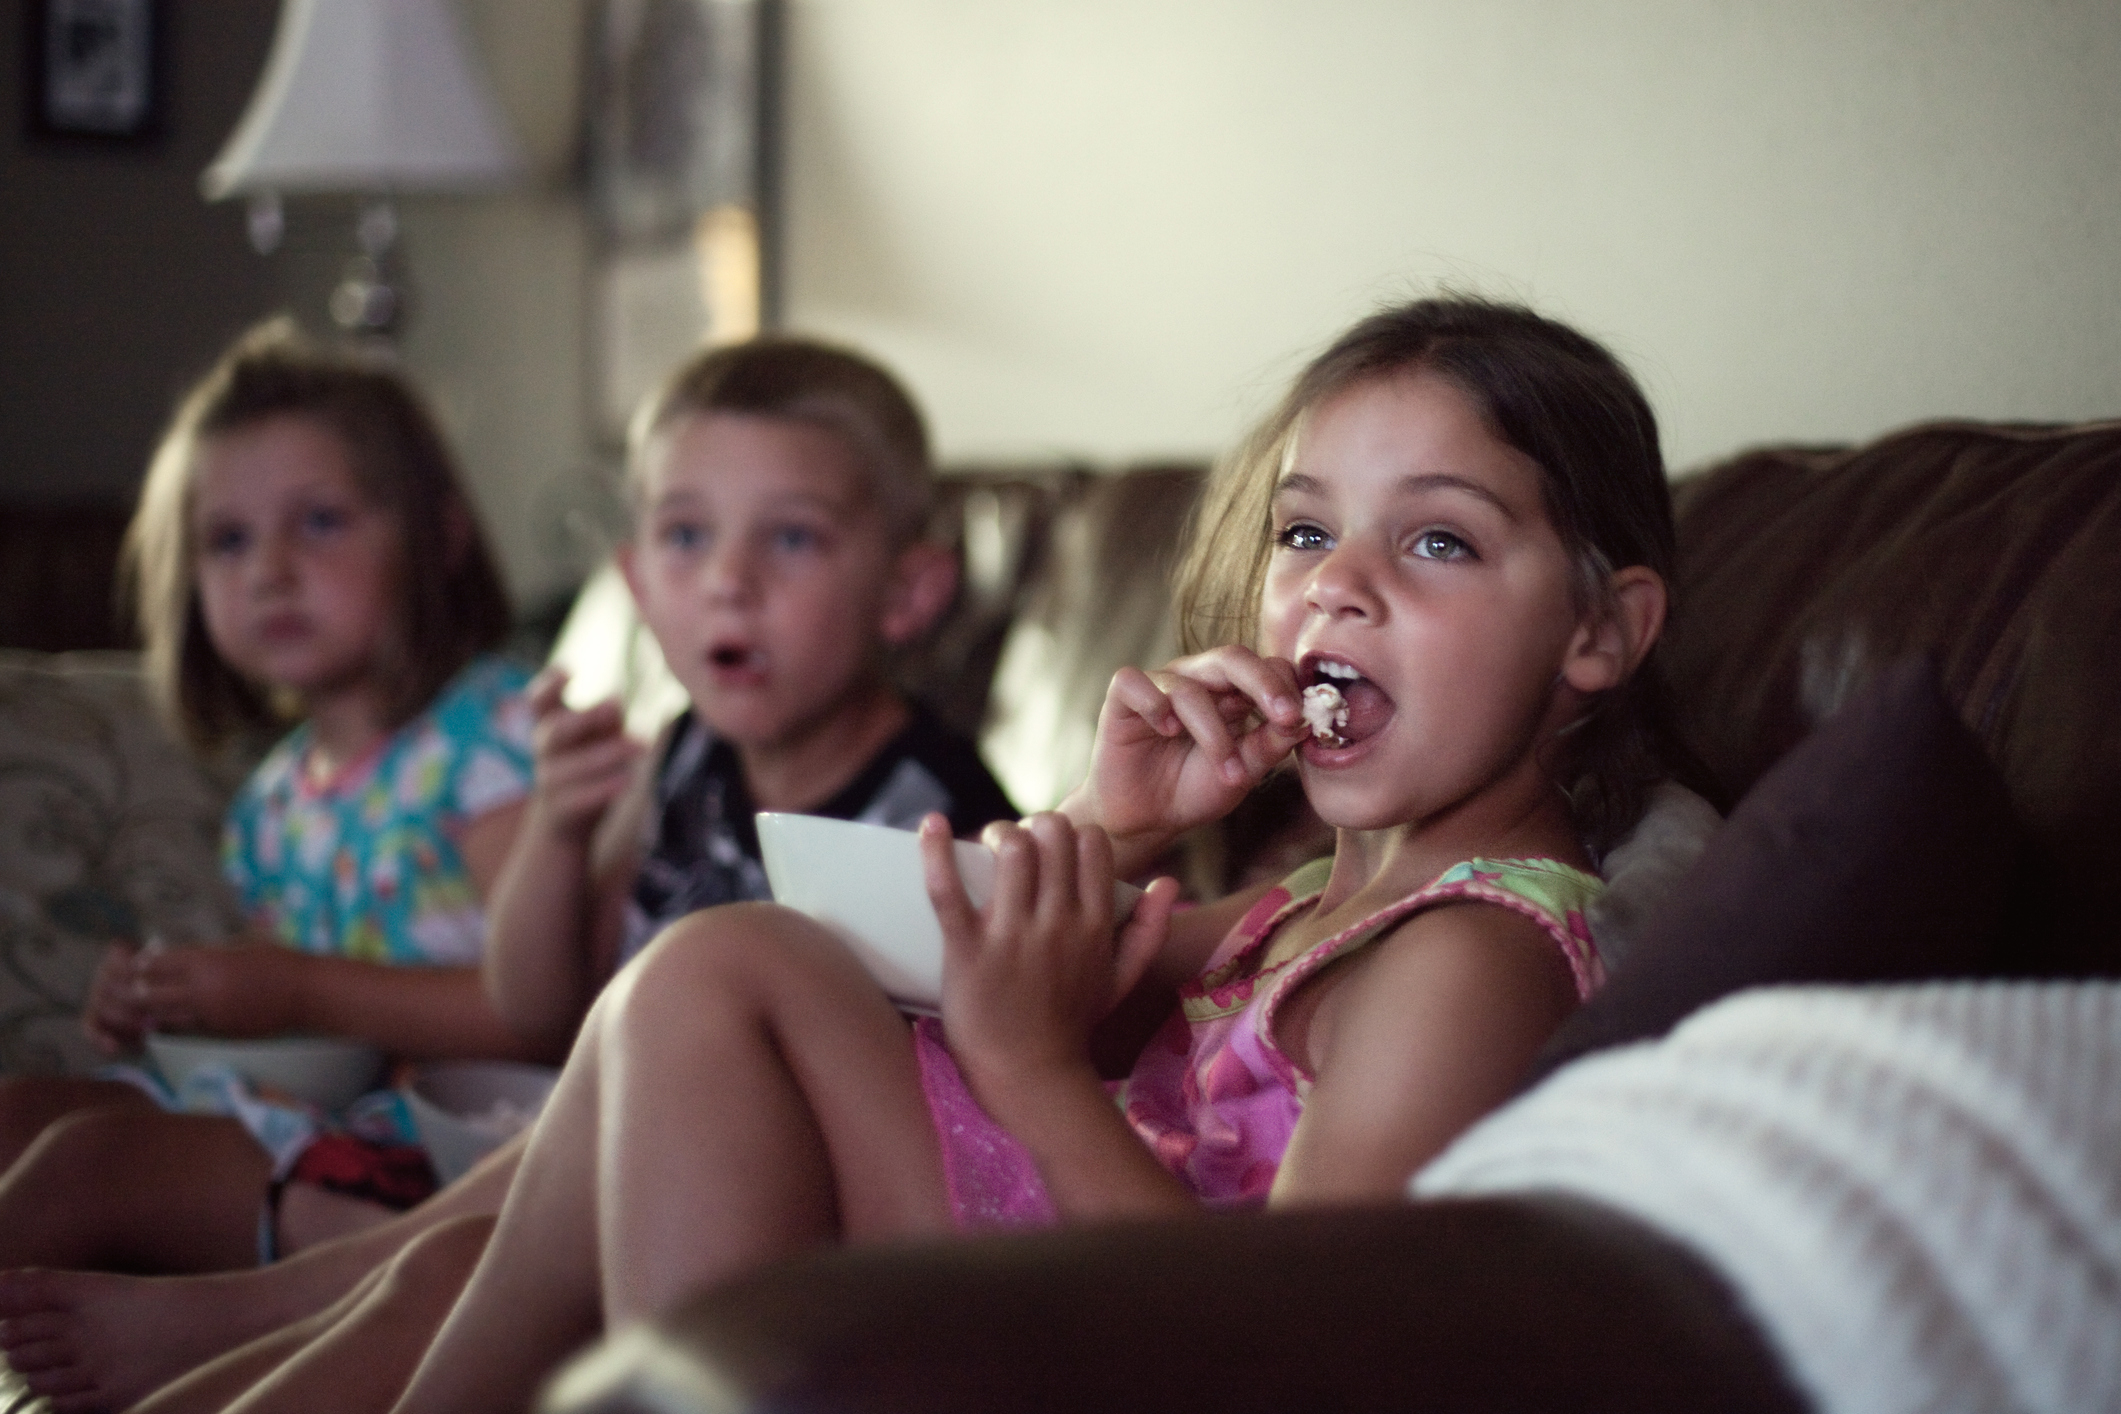 Three children watching TV, one eating, expressing focus and surprise